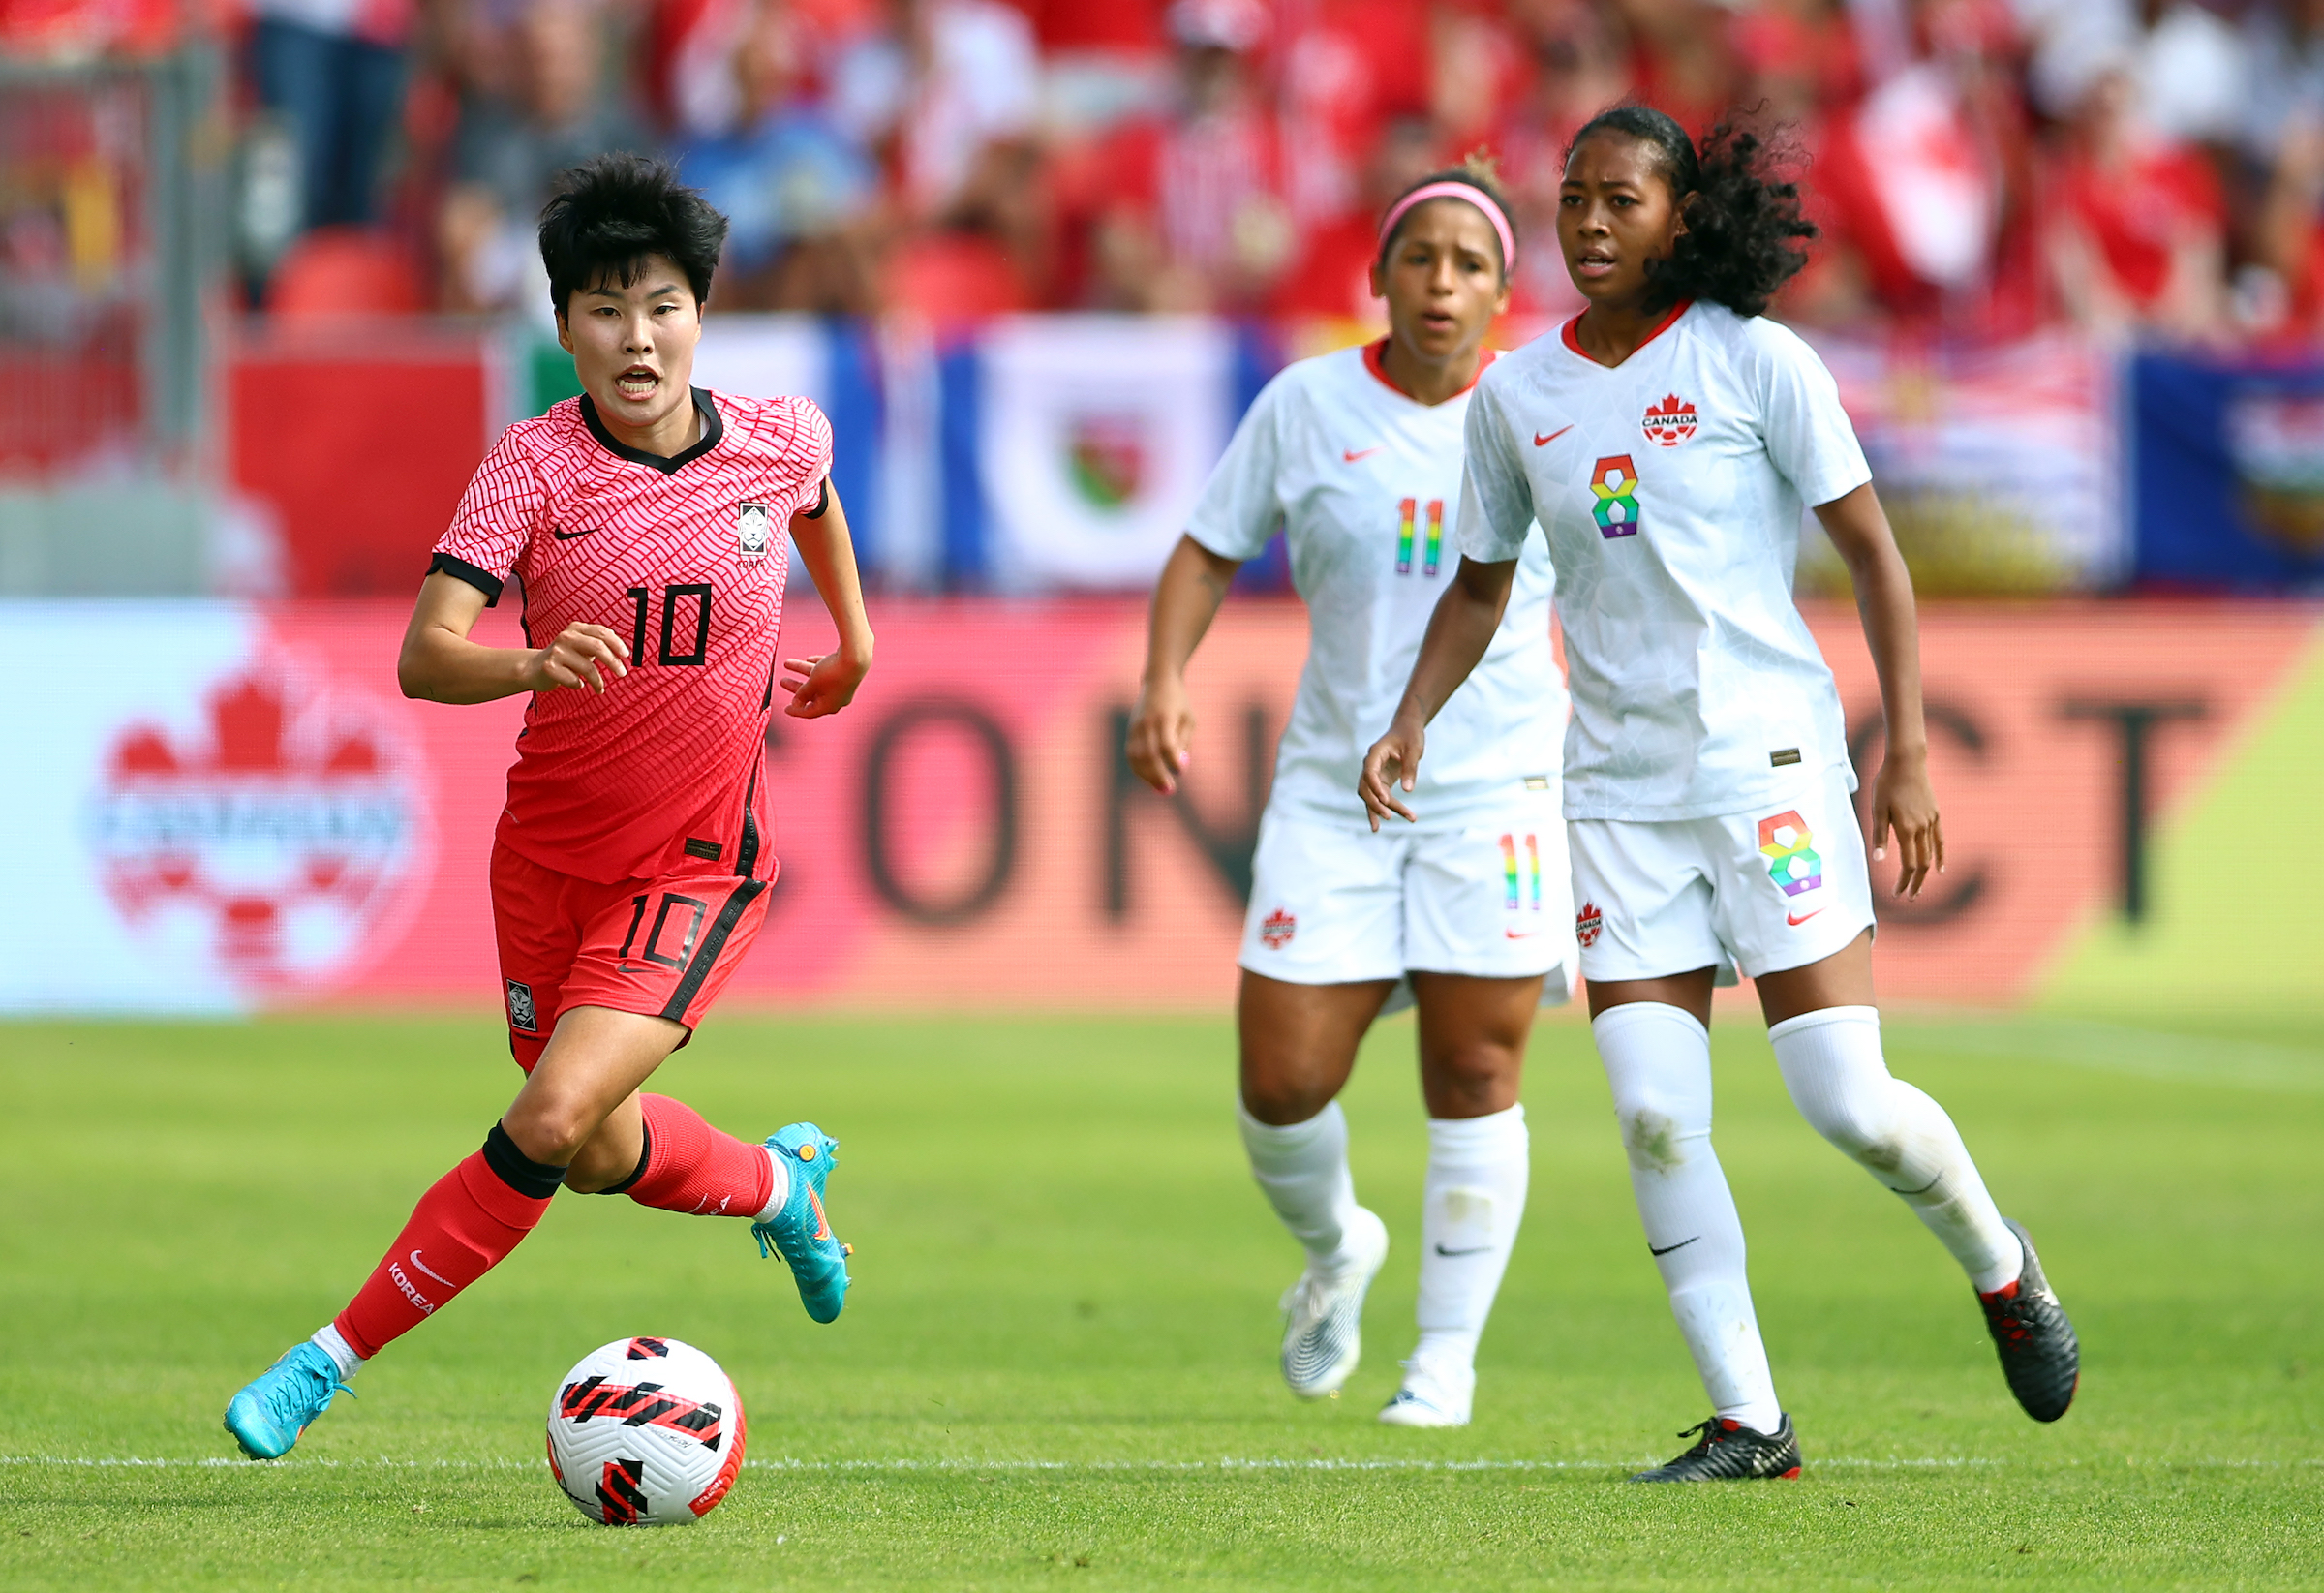 Soyun Ji #10 of South Korea chases the ball during a friendly match against Canada at BMO Field on June 26, 2022 in Toronto, Ontario, Canada. (Vaughn Ridley—Getty Images)